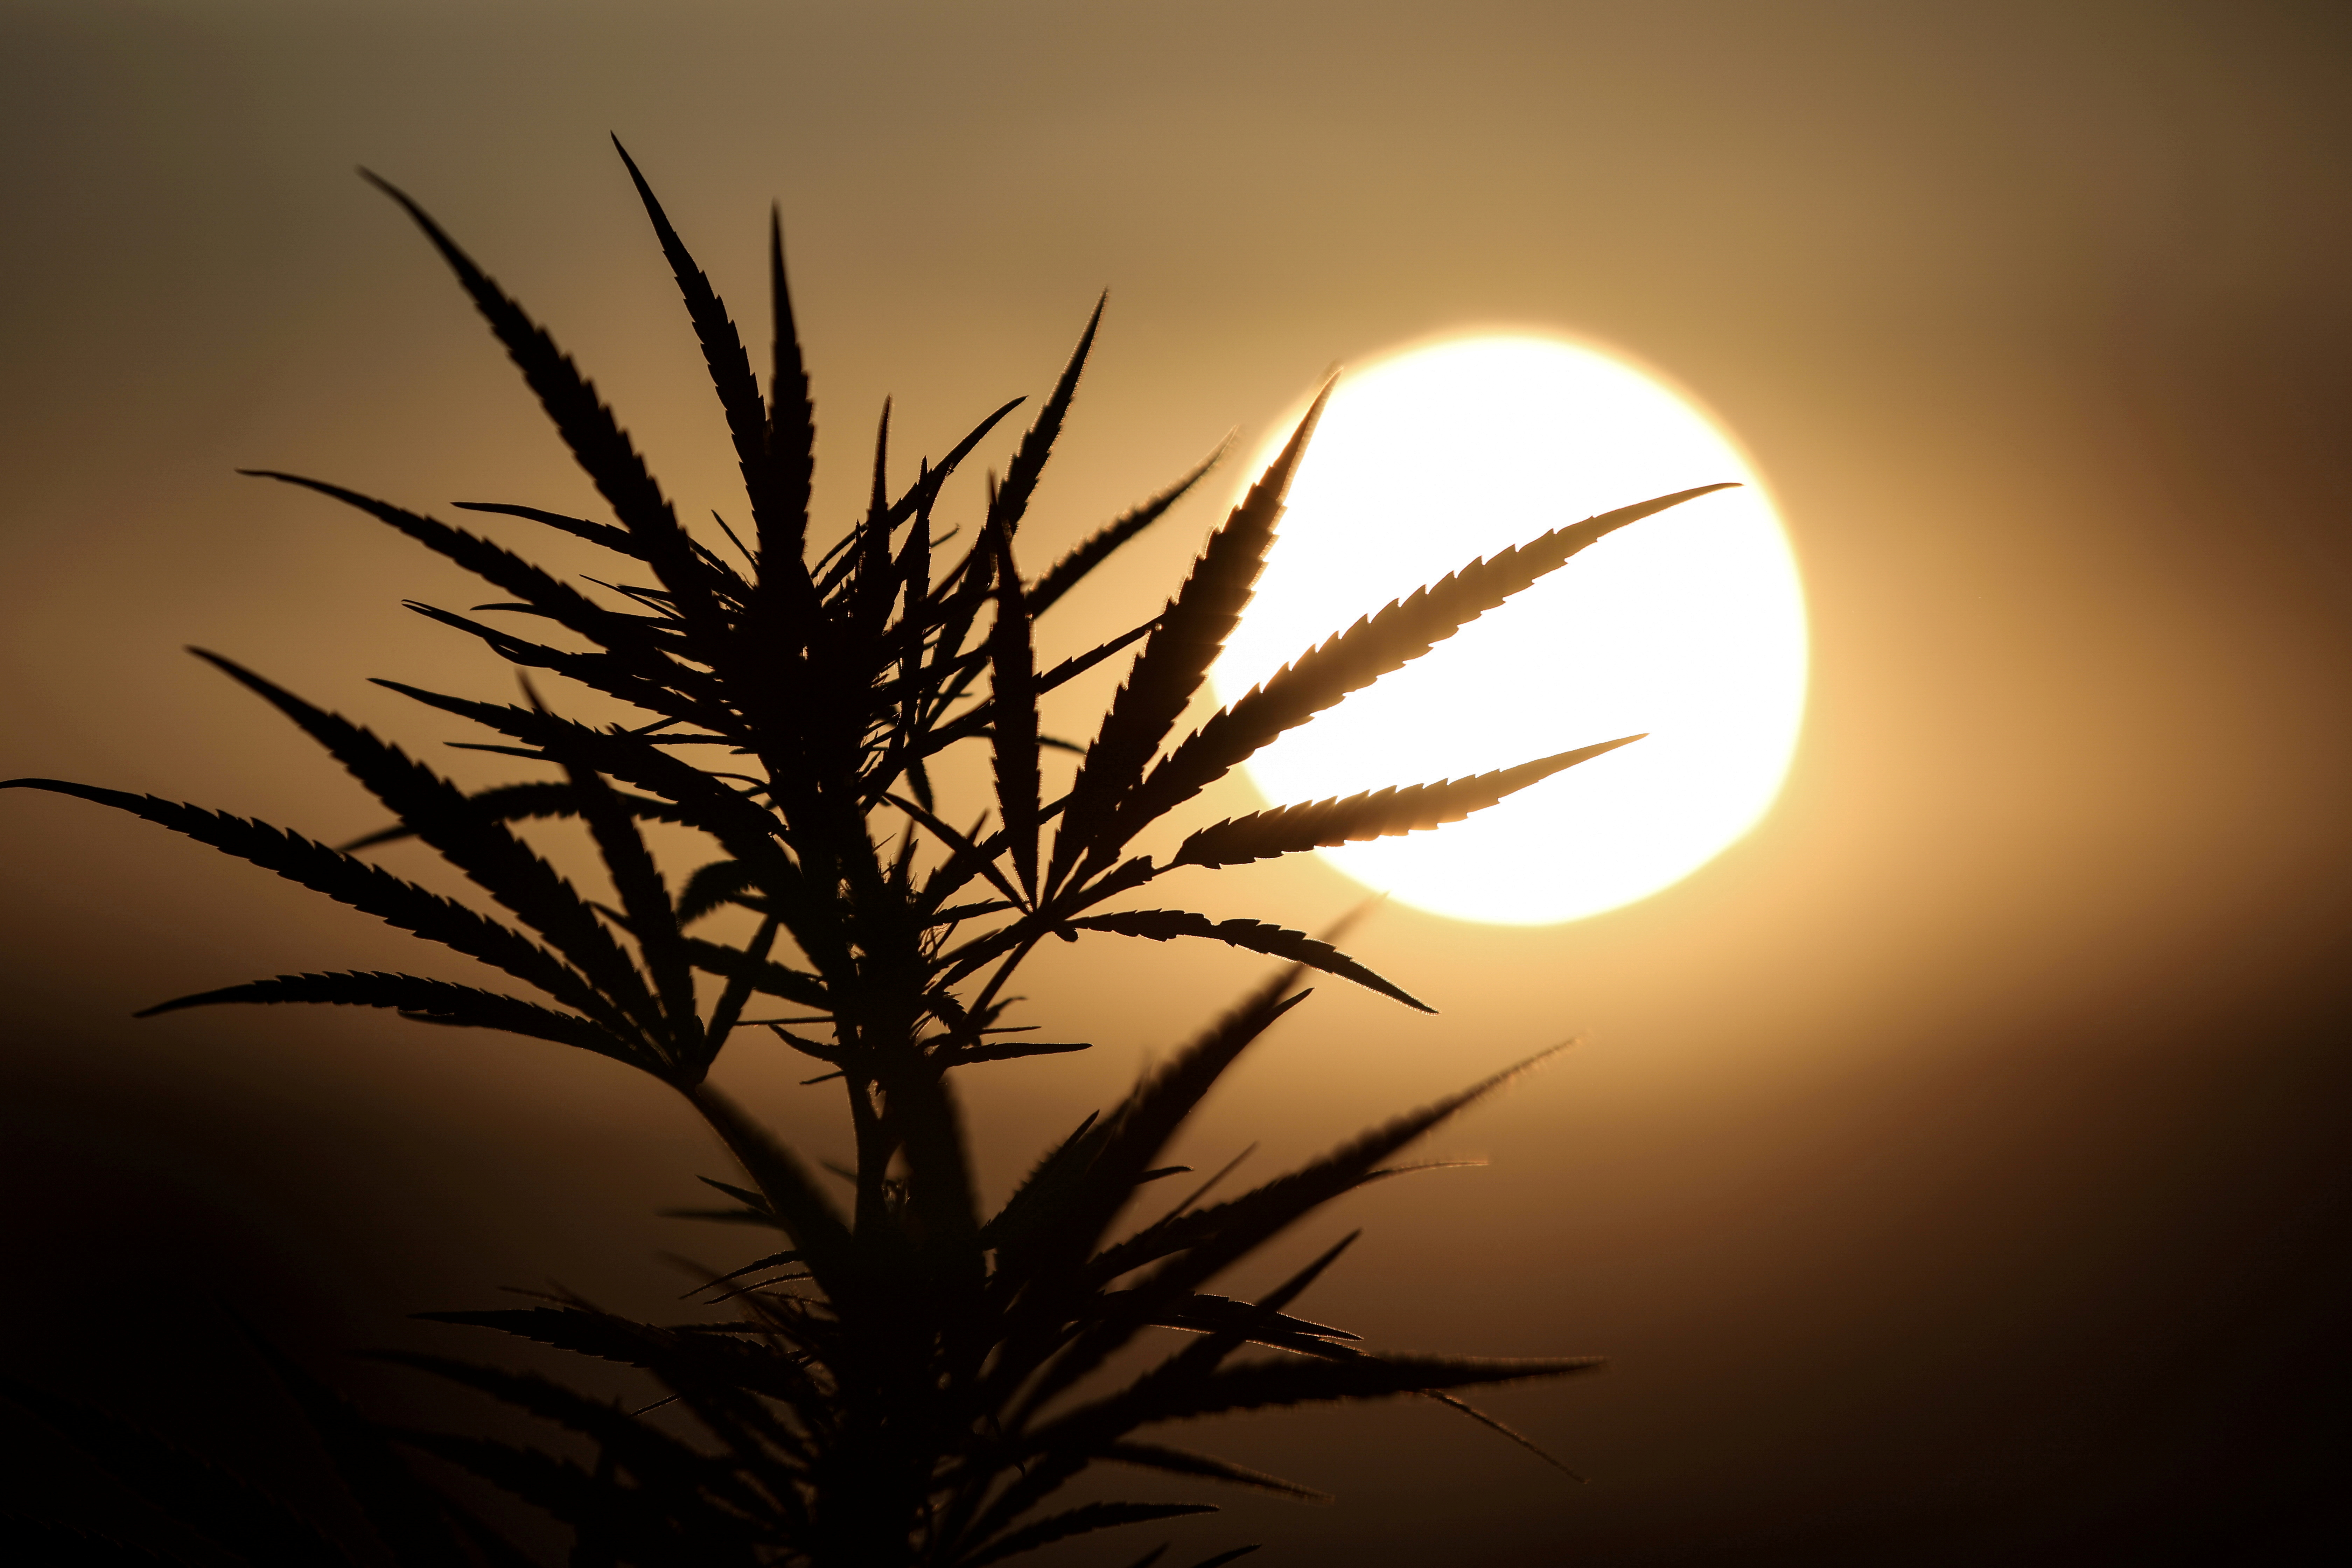 Leaves of a Carmagnola hemp strain plant are silhouetted as the sun sets at a medical cannabis plantation in Trikala